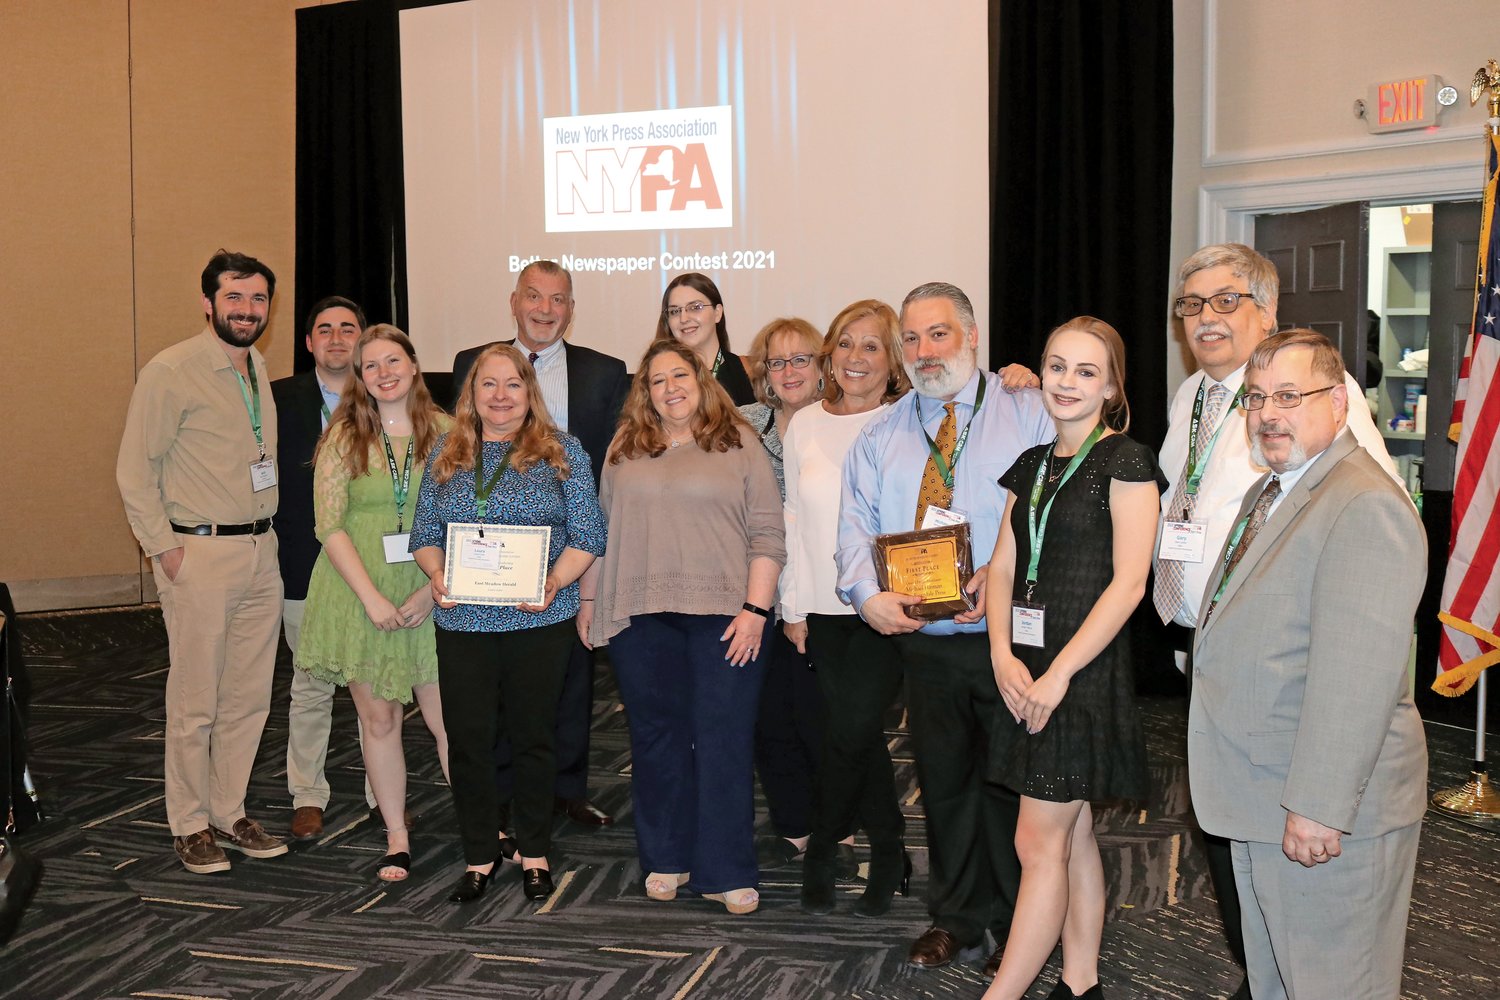 Herald Community Newspapers was well-represented at the New York Press Association’s spring conference in Saratoga Springs last weekend, where the group won a total of 28 state awards. From left, reporters Will Sheeline and Tom Carrozza; senior reporter Mallory Wilson; publisher emeritus Cliff Richner; senior editor Laura Lane; senior reporter Karina Kovac; sales/marketing associate Jessica Kleiman; digital sales manager Lori Berger; sales vice president Rhonda Glickman; executive editor Michael Hinman; senior reporter Jordan Vallone; Riverdale Press editor Gary Larkin; and deputy editor Jeffrey Bessen.